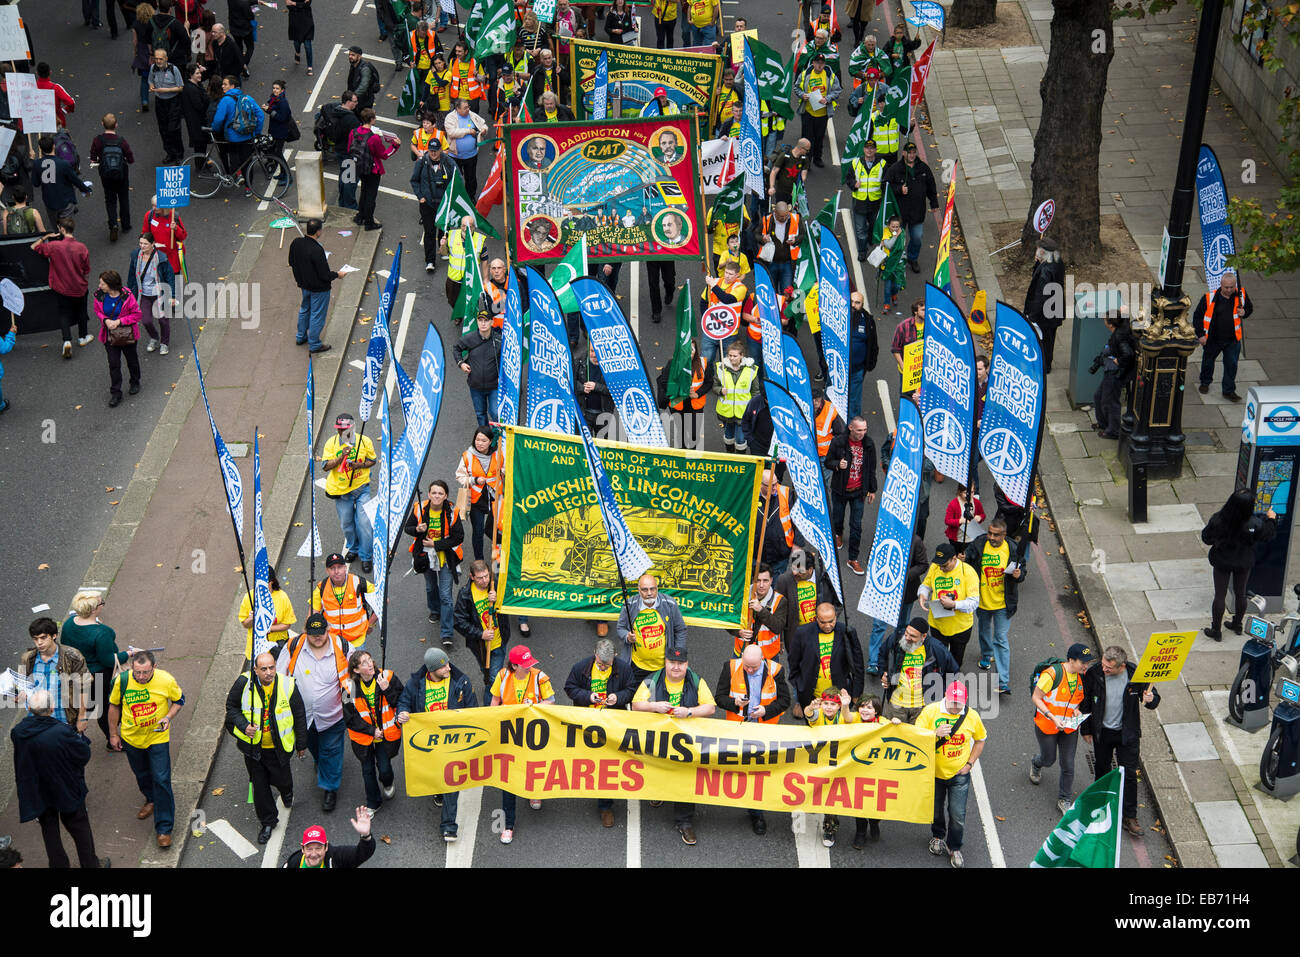 RMT Union band, Britain Needs a Pay Rise march, London, 18 October 2014, UK Stock Photo